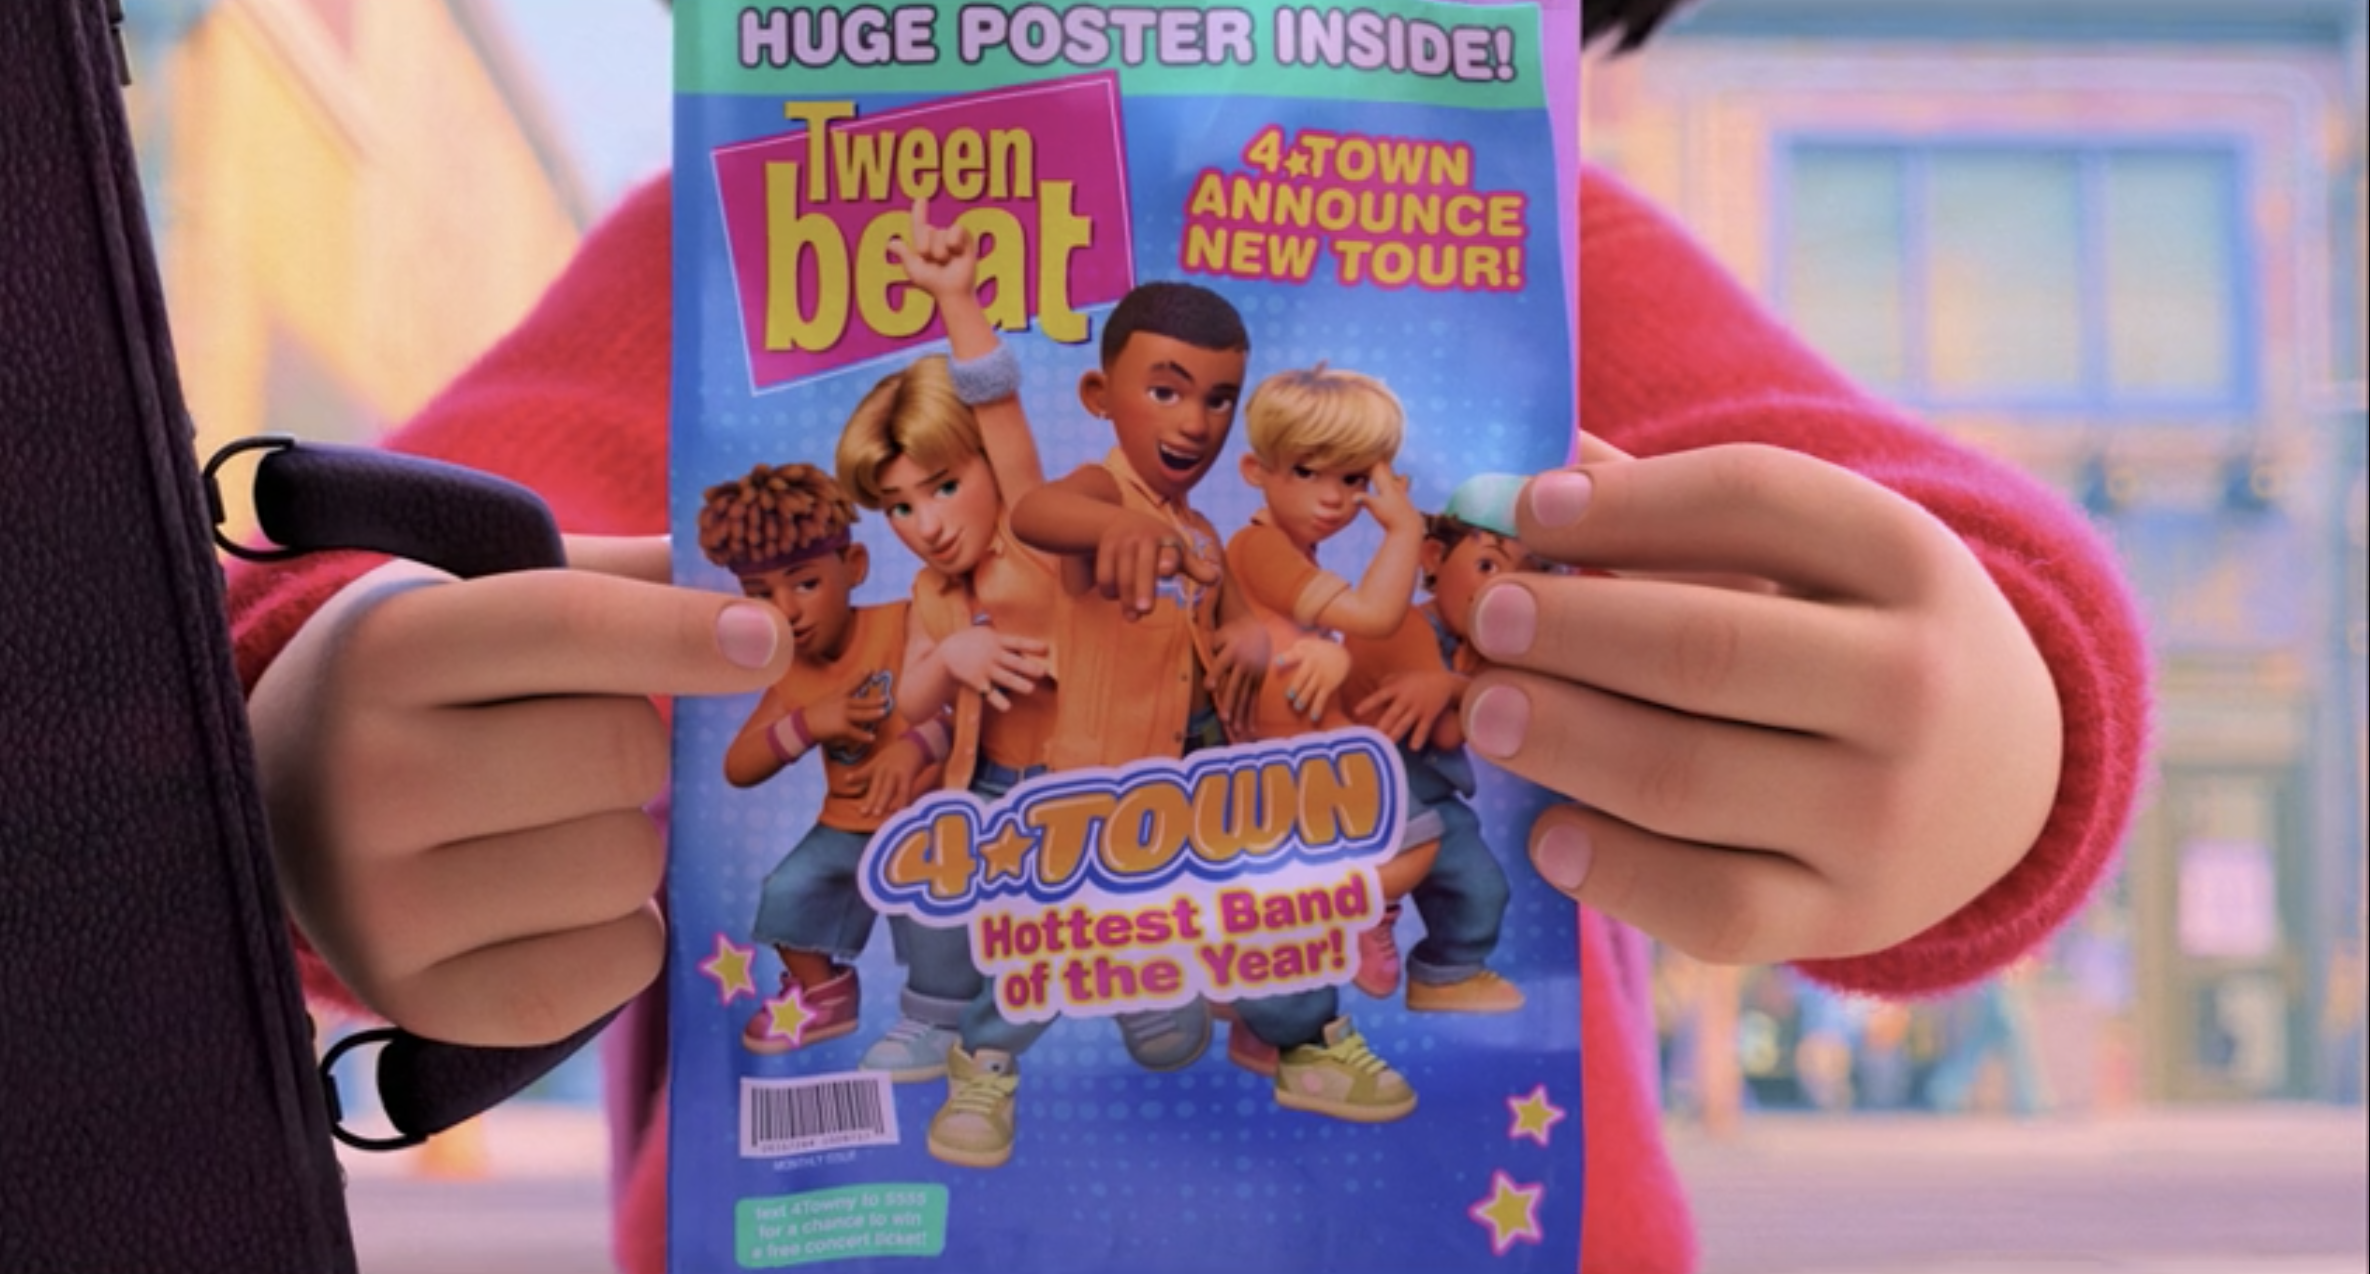 The cover of Tween Beat magazine with 4*Town